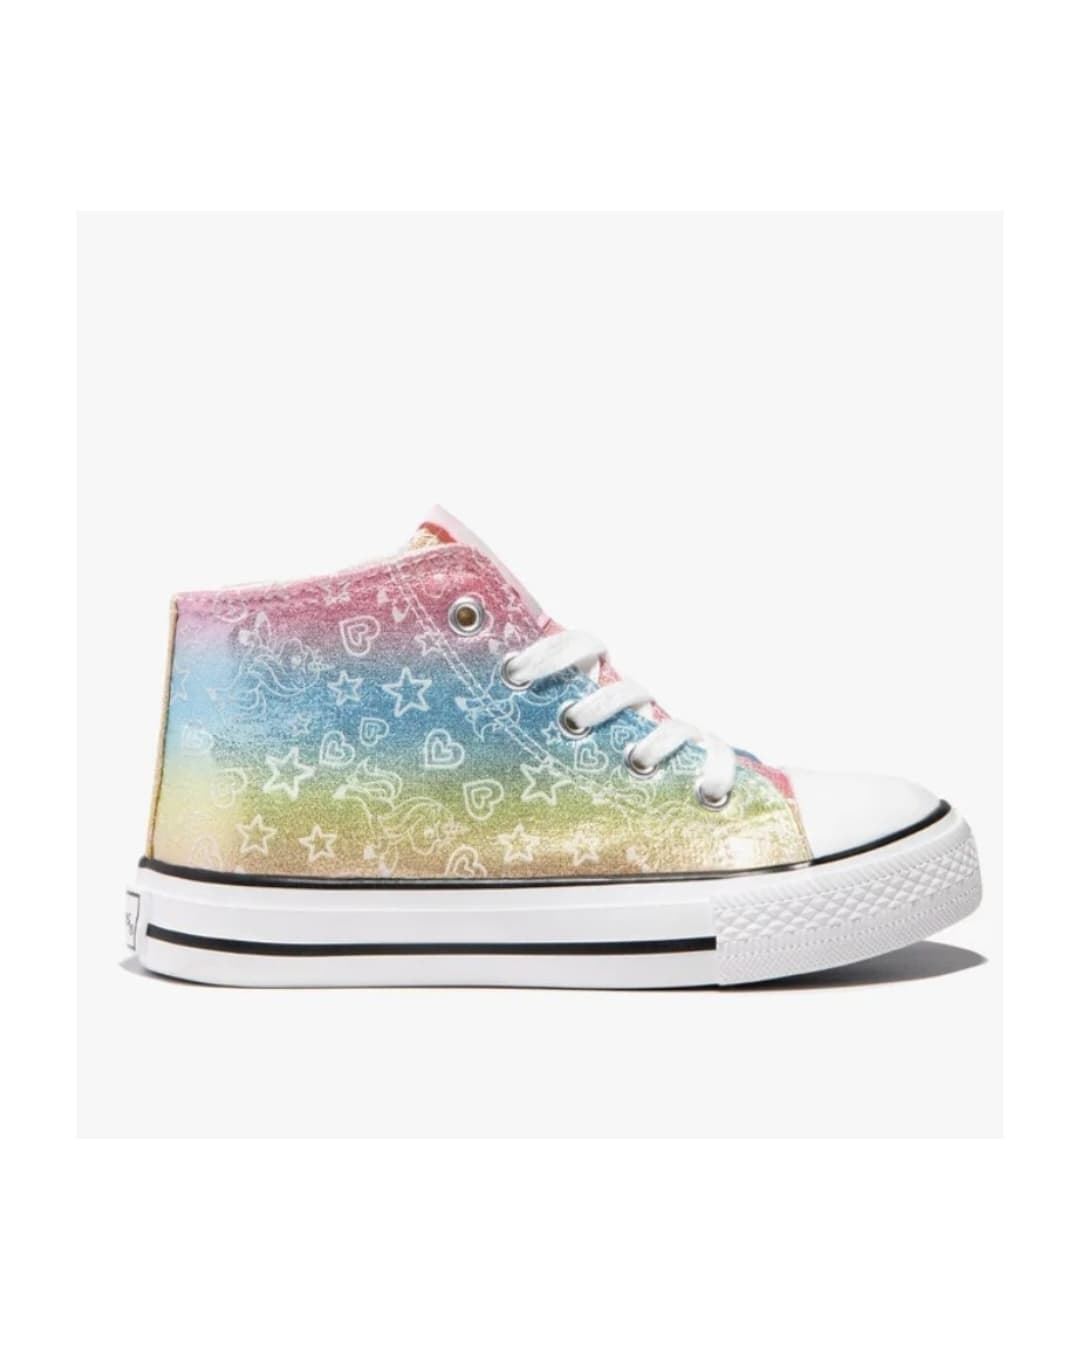 Conguitos Unicorn High Top Sneakers Glow in the Dark - Image 1